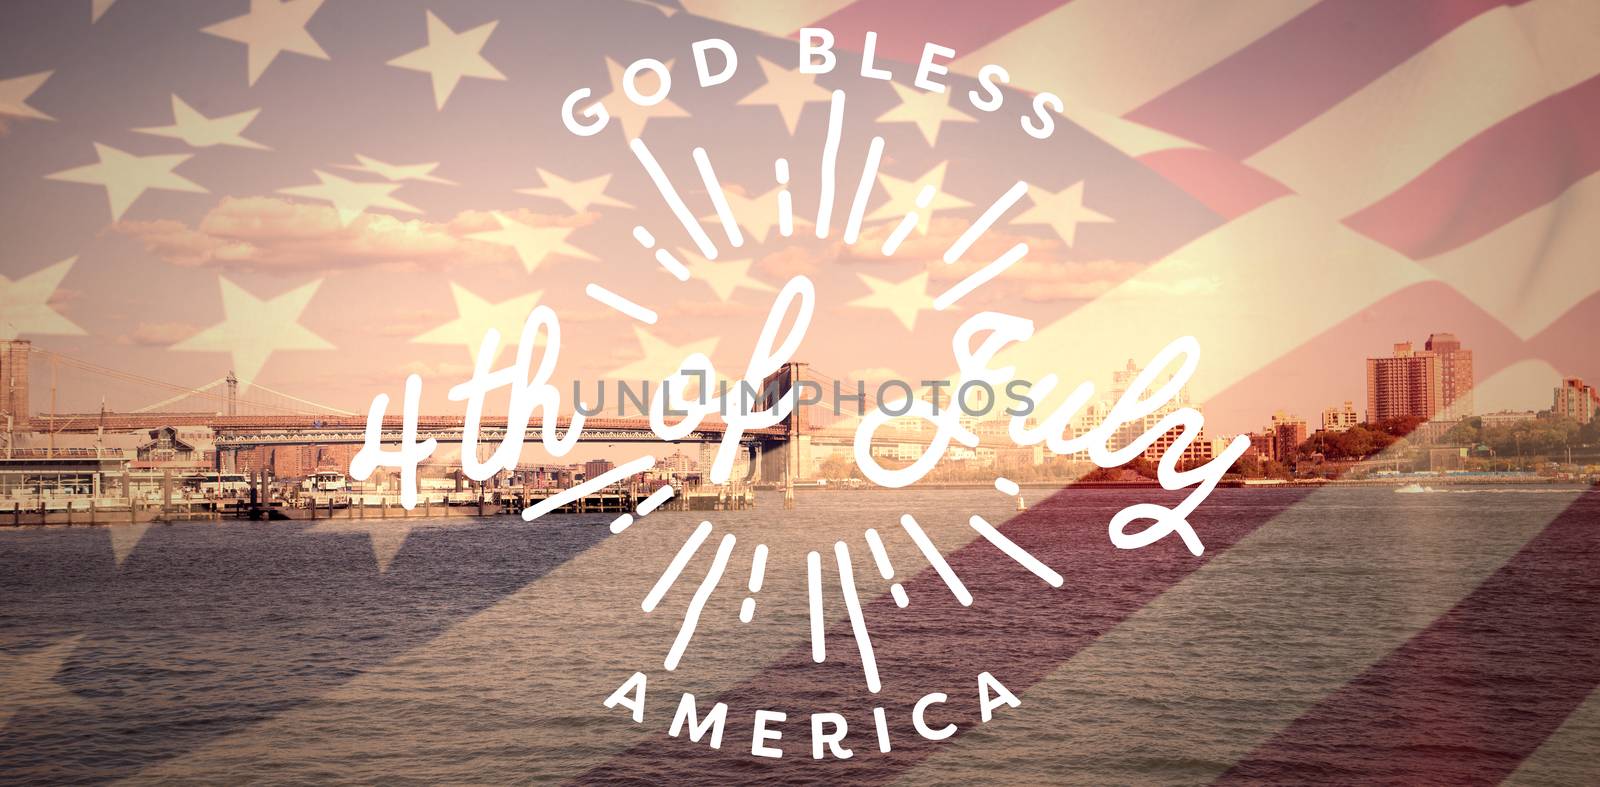 Digitally generated image of happy 4th of july message against bridge over bridge against sky